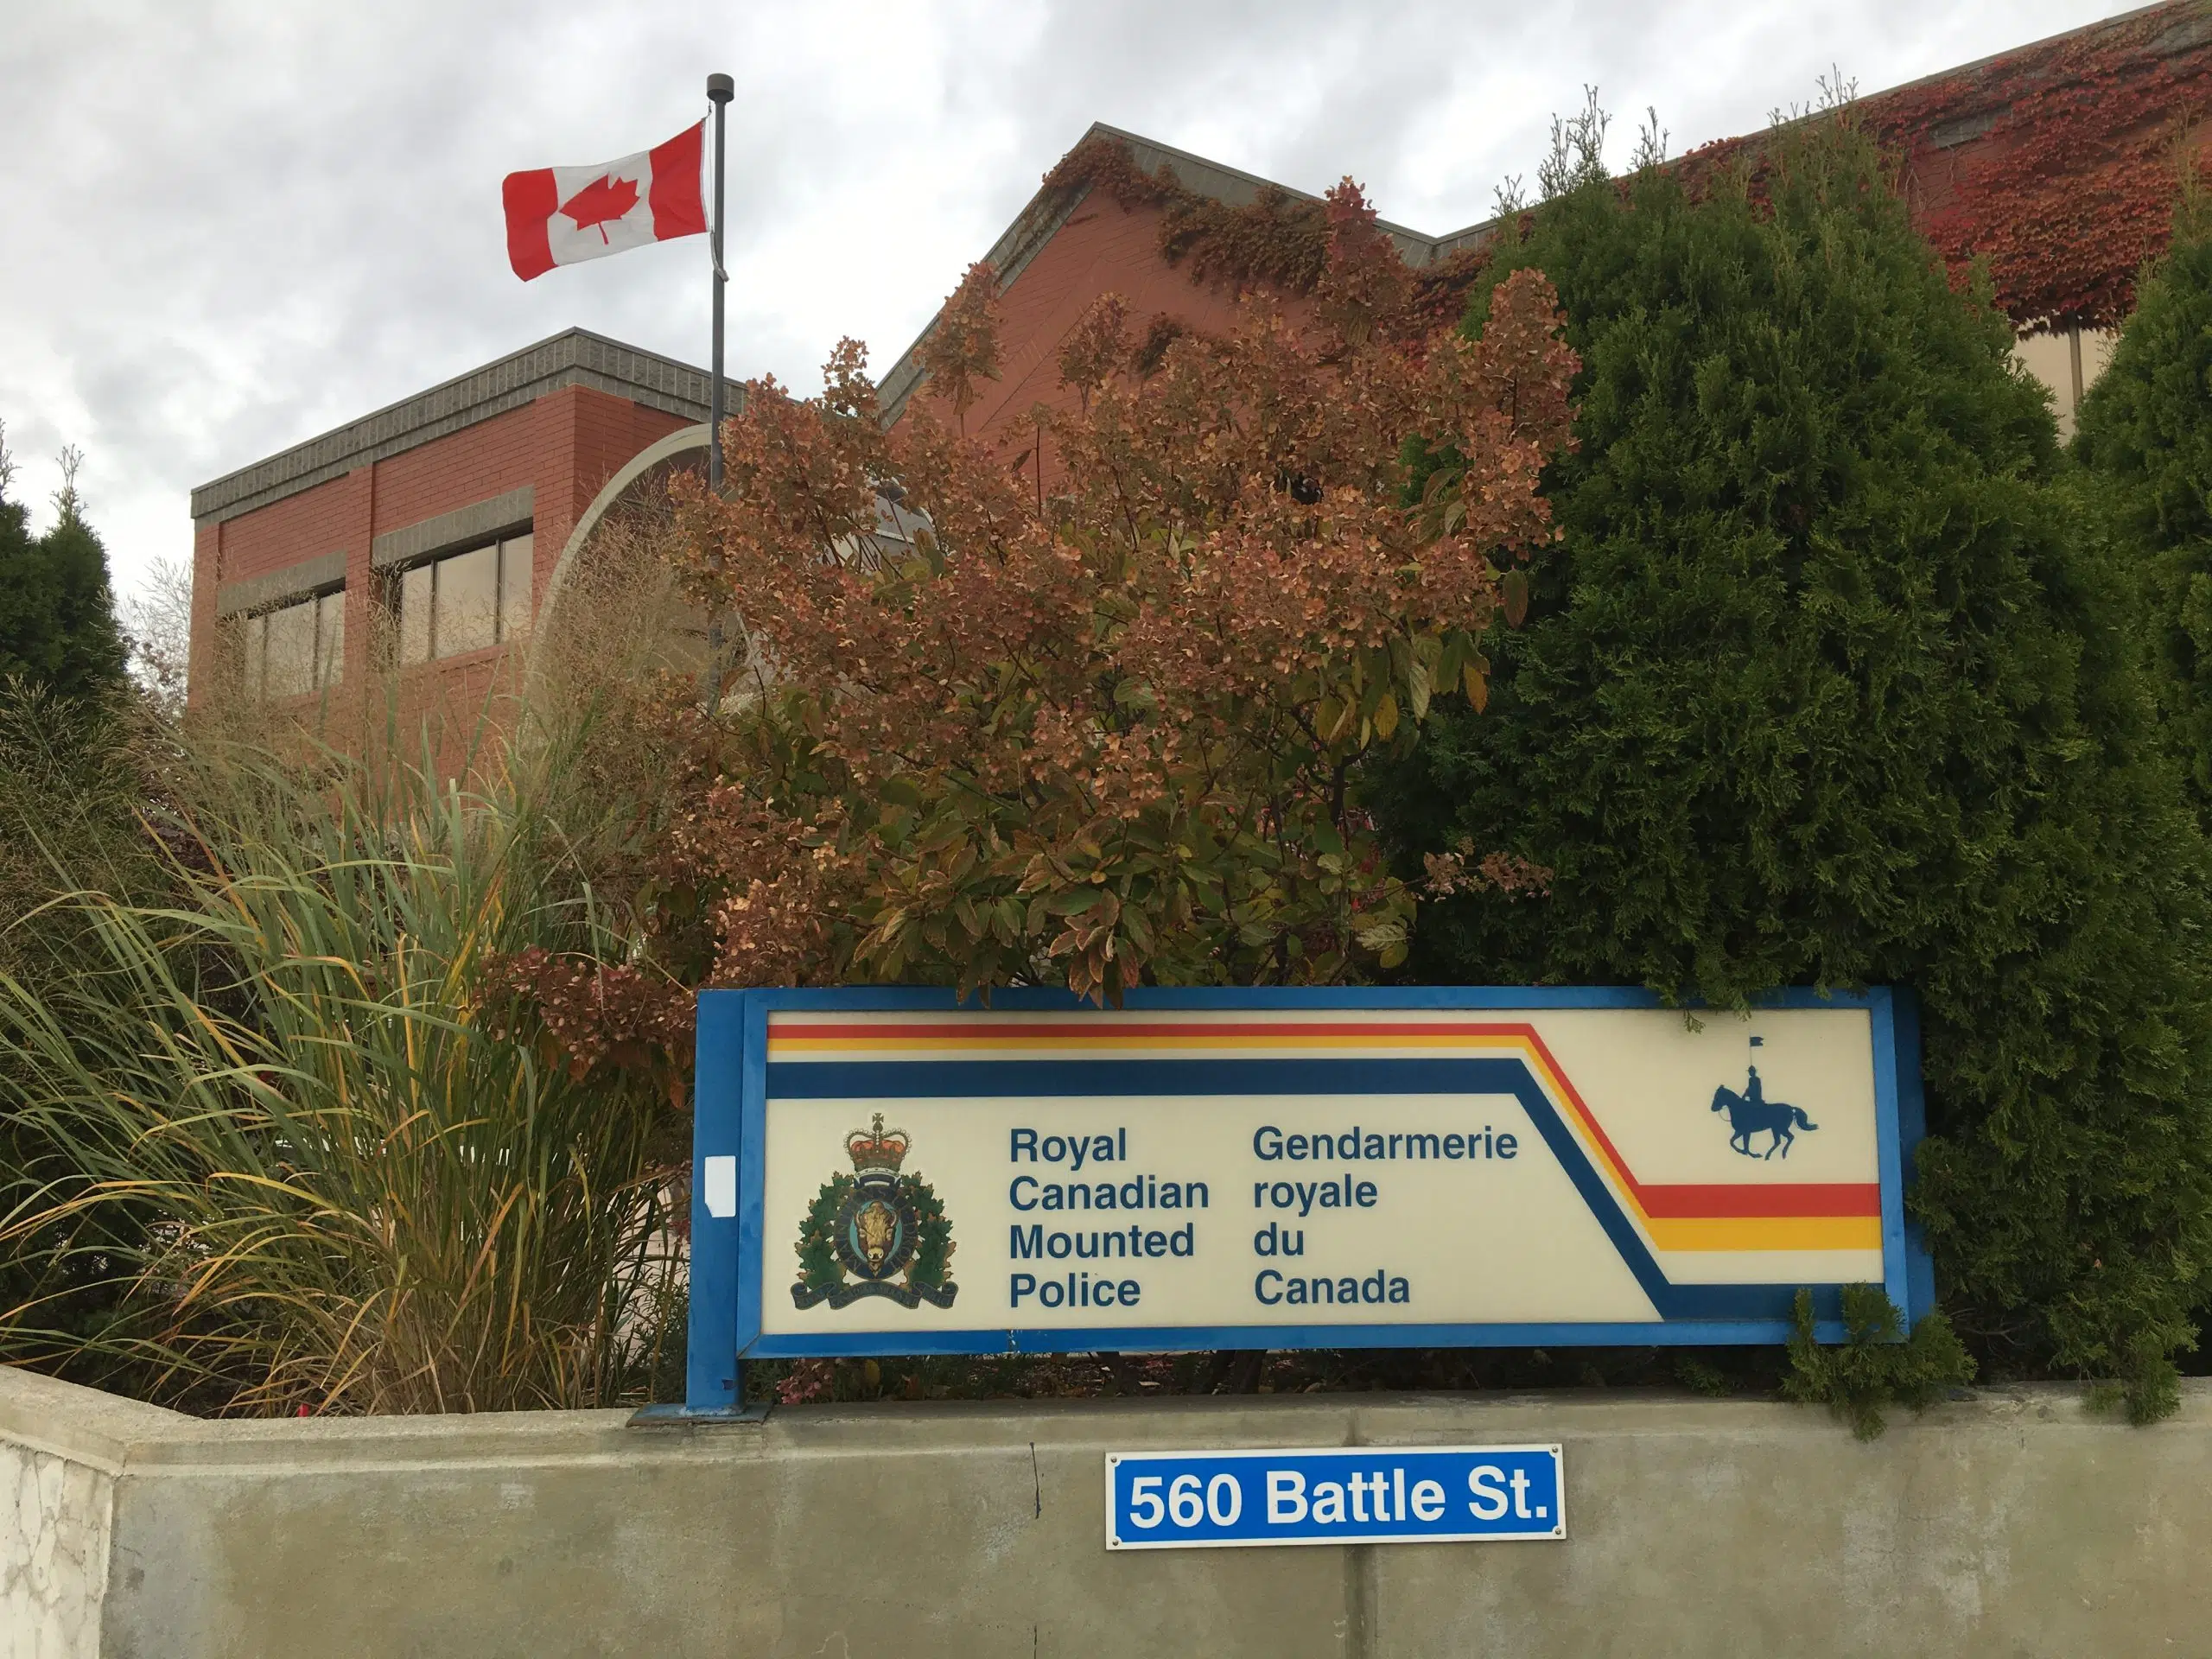 Deadly overdose discovery: Kamloops RCMP say woman found dead, two others in "medical distress"